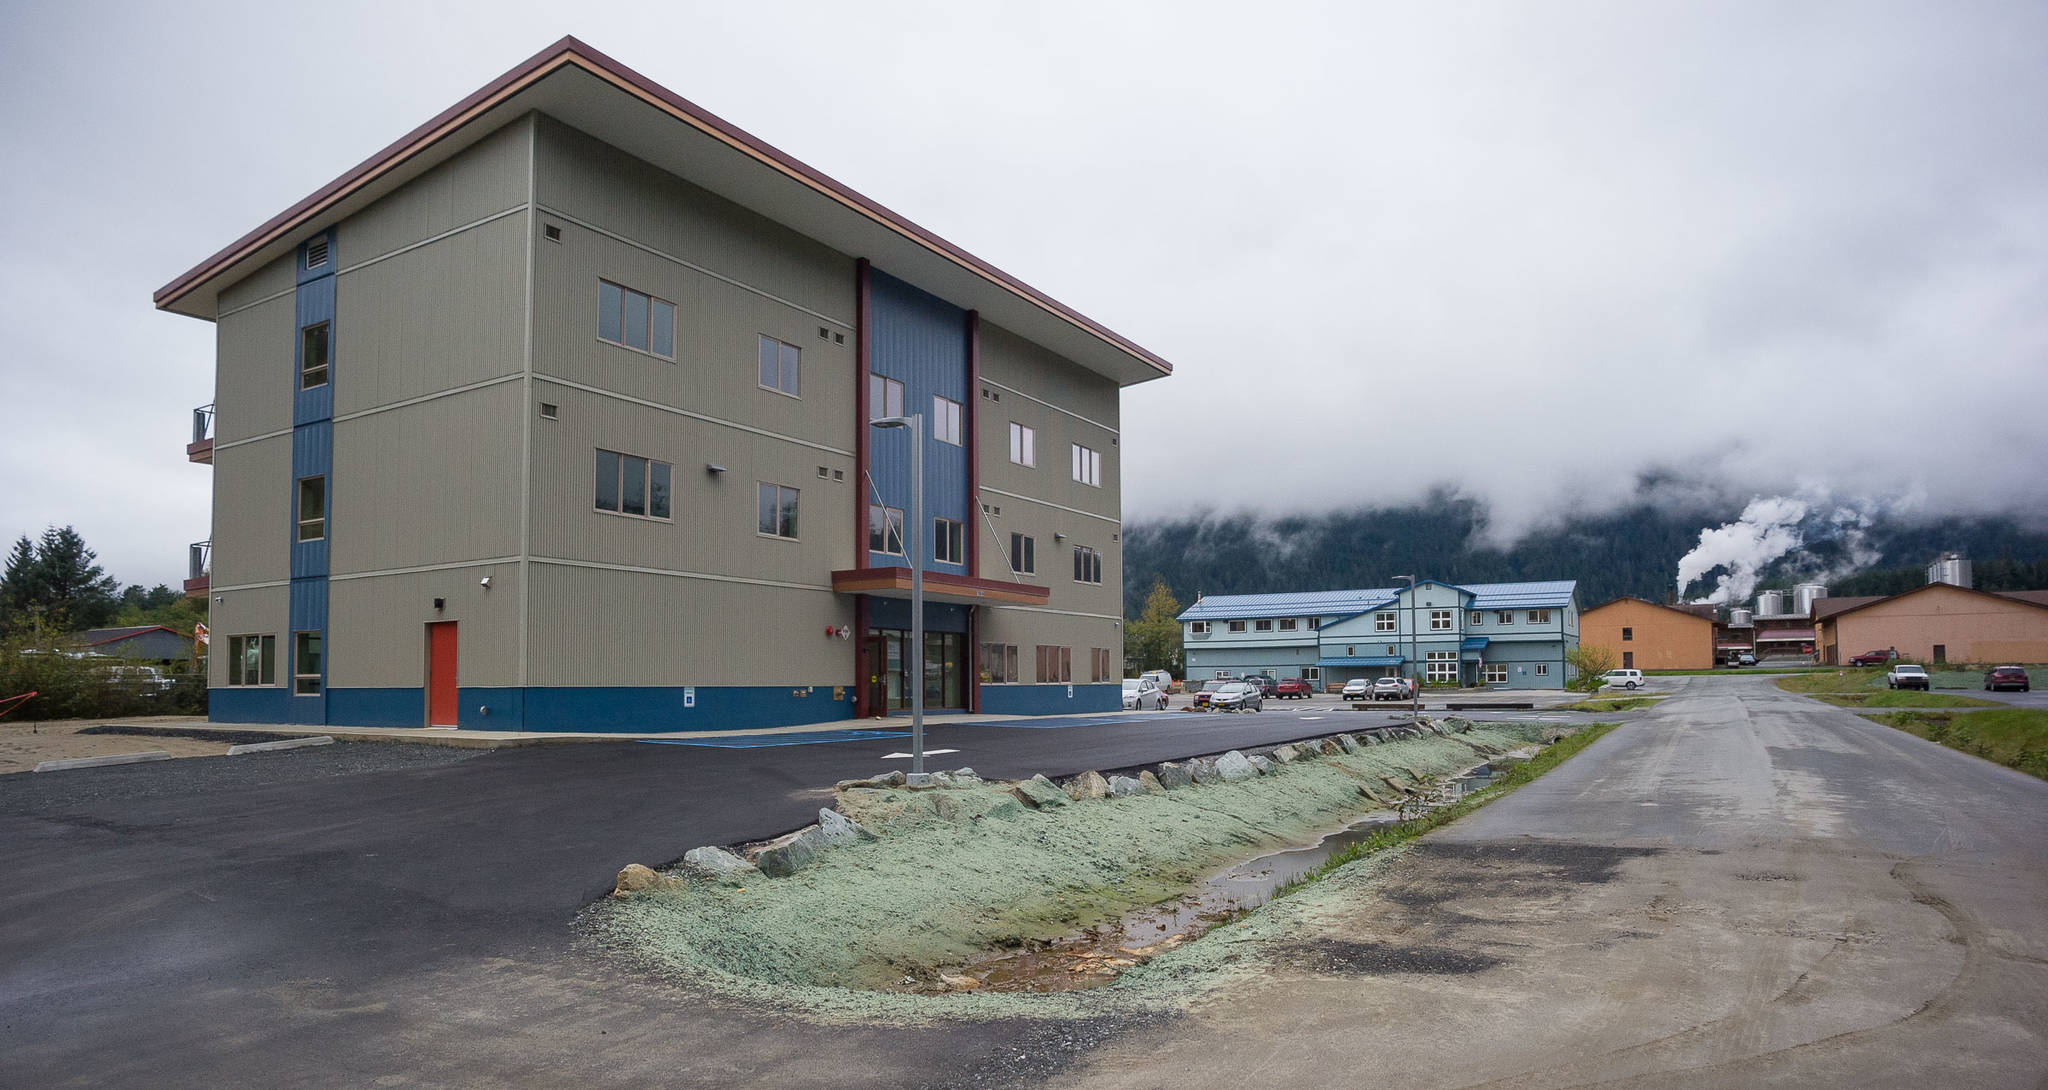 The finished Housing First Project on Tuesday, Sept. 19, 2017. (Michael Penn | Juneau Empire File)